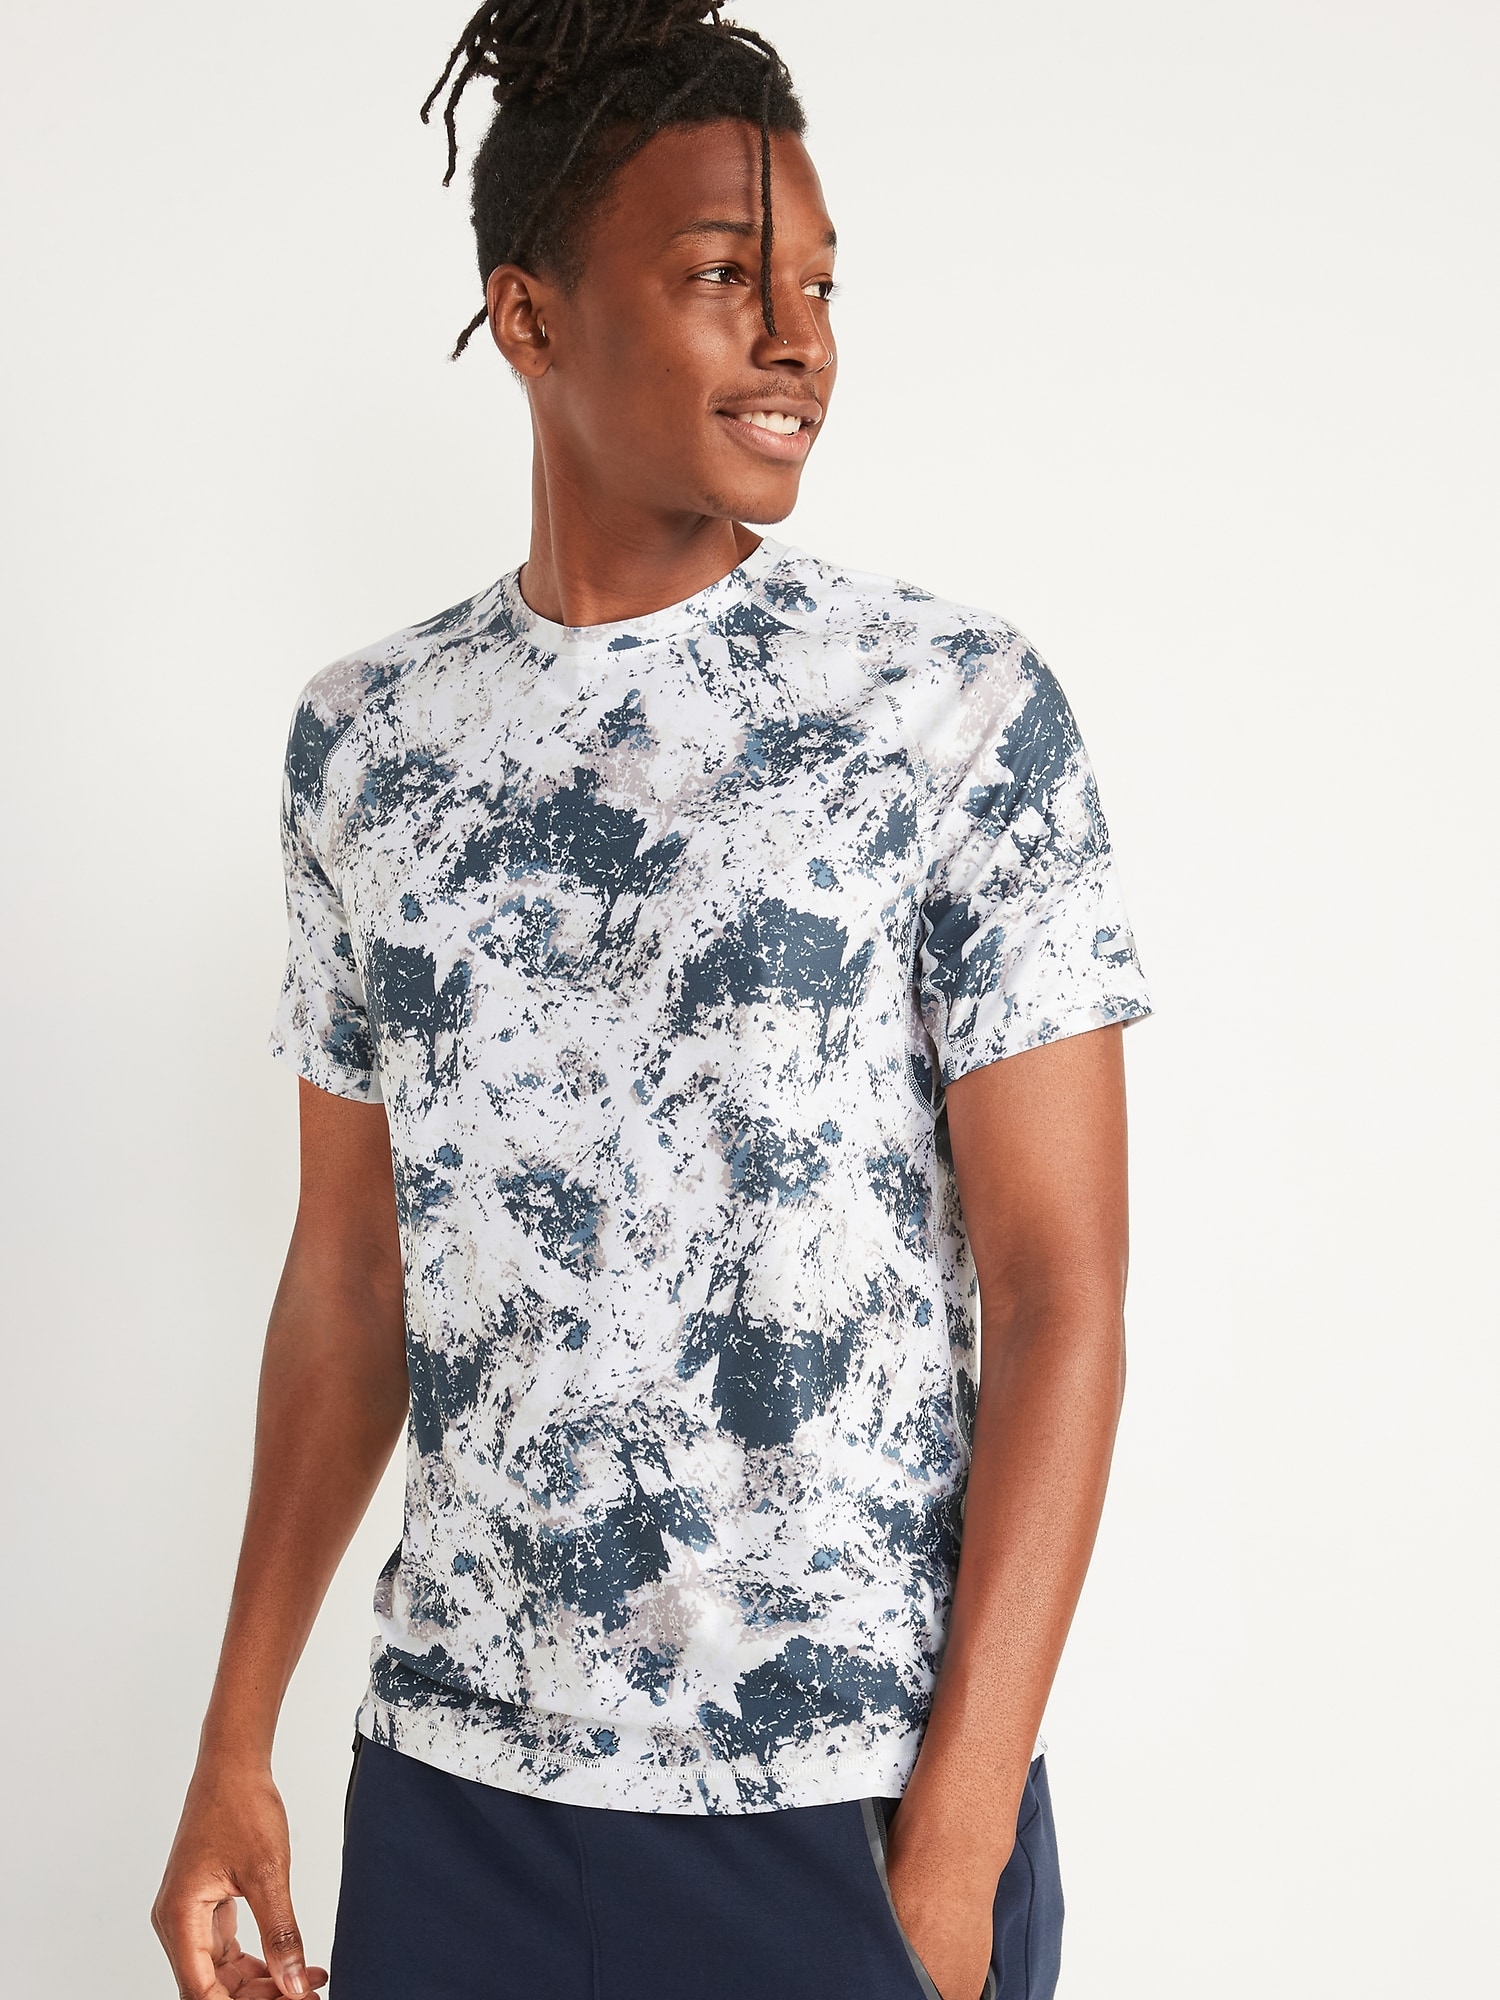 Breathe ON Printed T-Shirt for Men | Old Navy